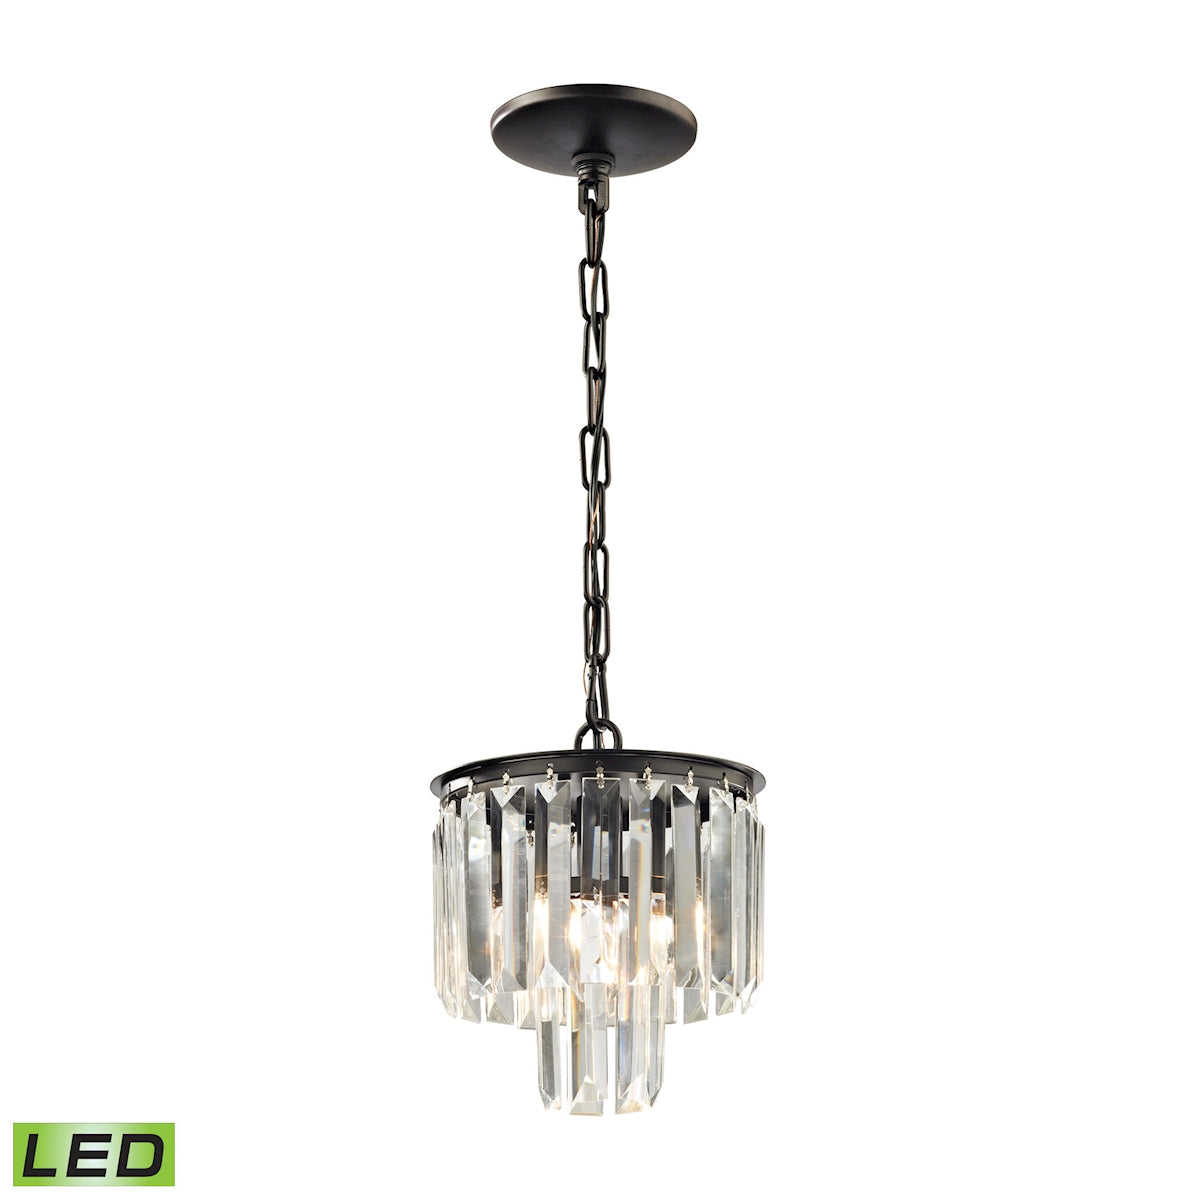 ELK Lighting 15224/1-LED Palacial 1-Light Mini Pendant in Oil Rubbed Bronze with Clear Crystal - Includes LED Bulb